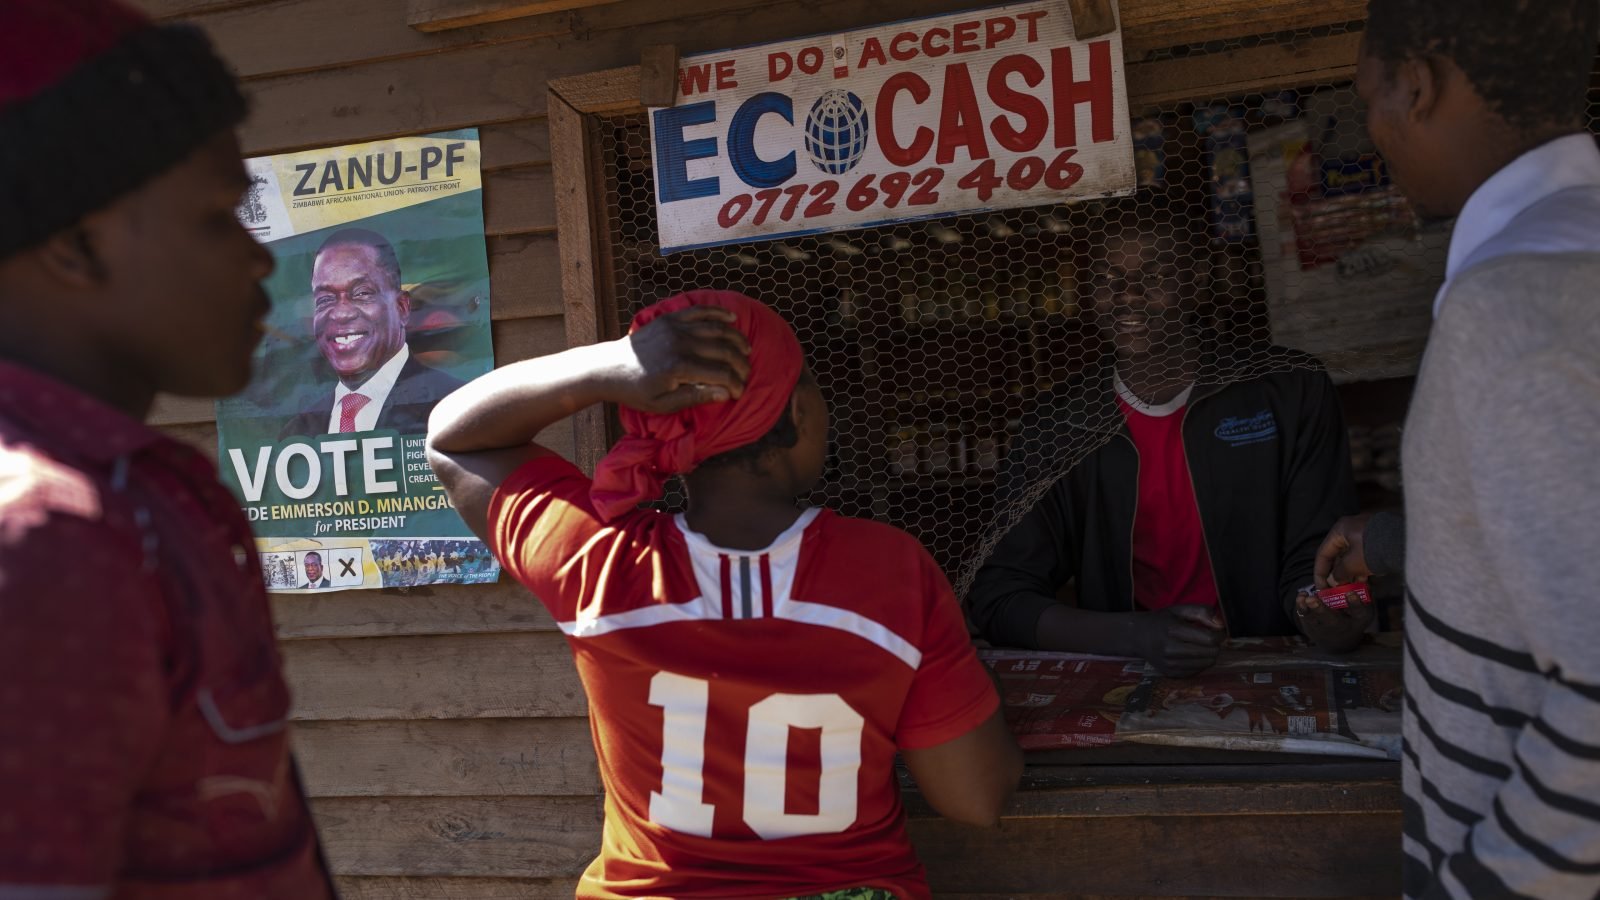 “It’s a lazy tax”: Why African governments’ obsession with mobile money could backfire